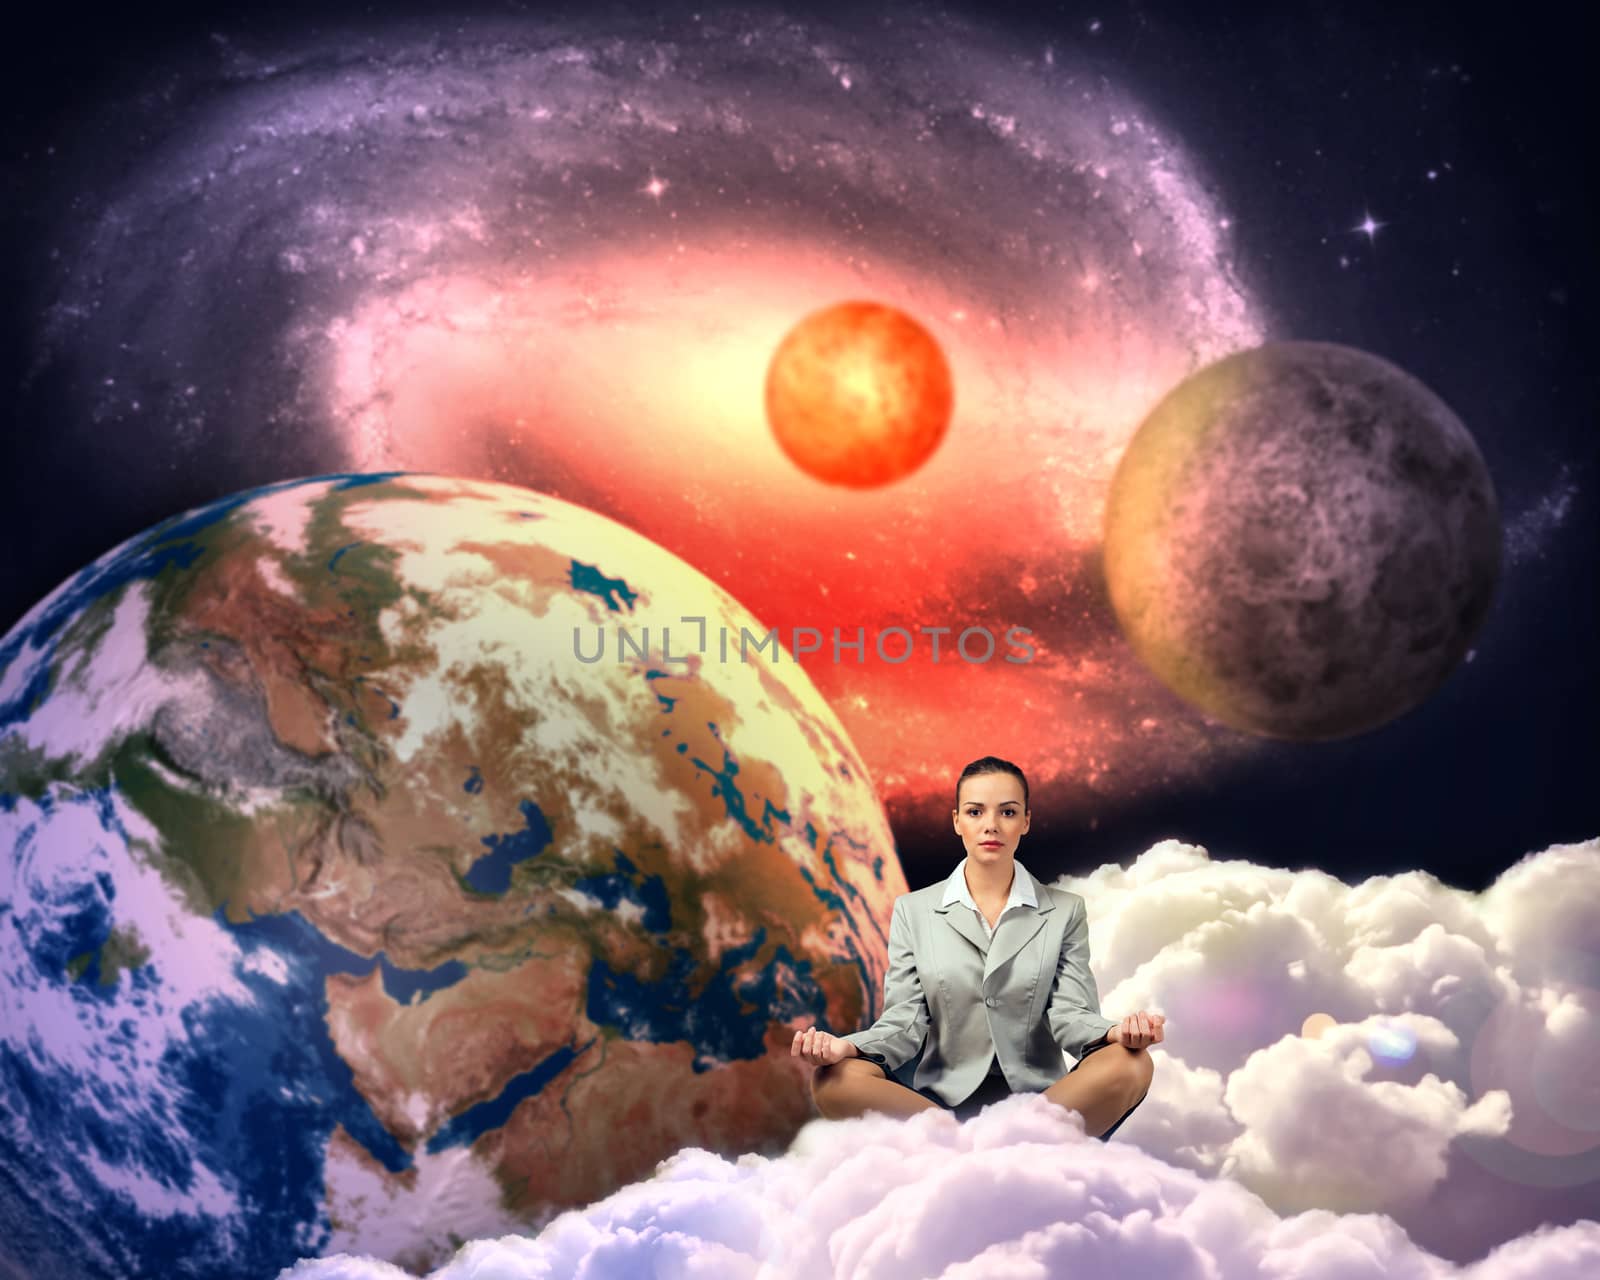 image of a businesswoman meditating in the clouds in space. Elements of this image furnished by NASA